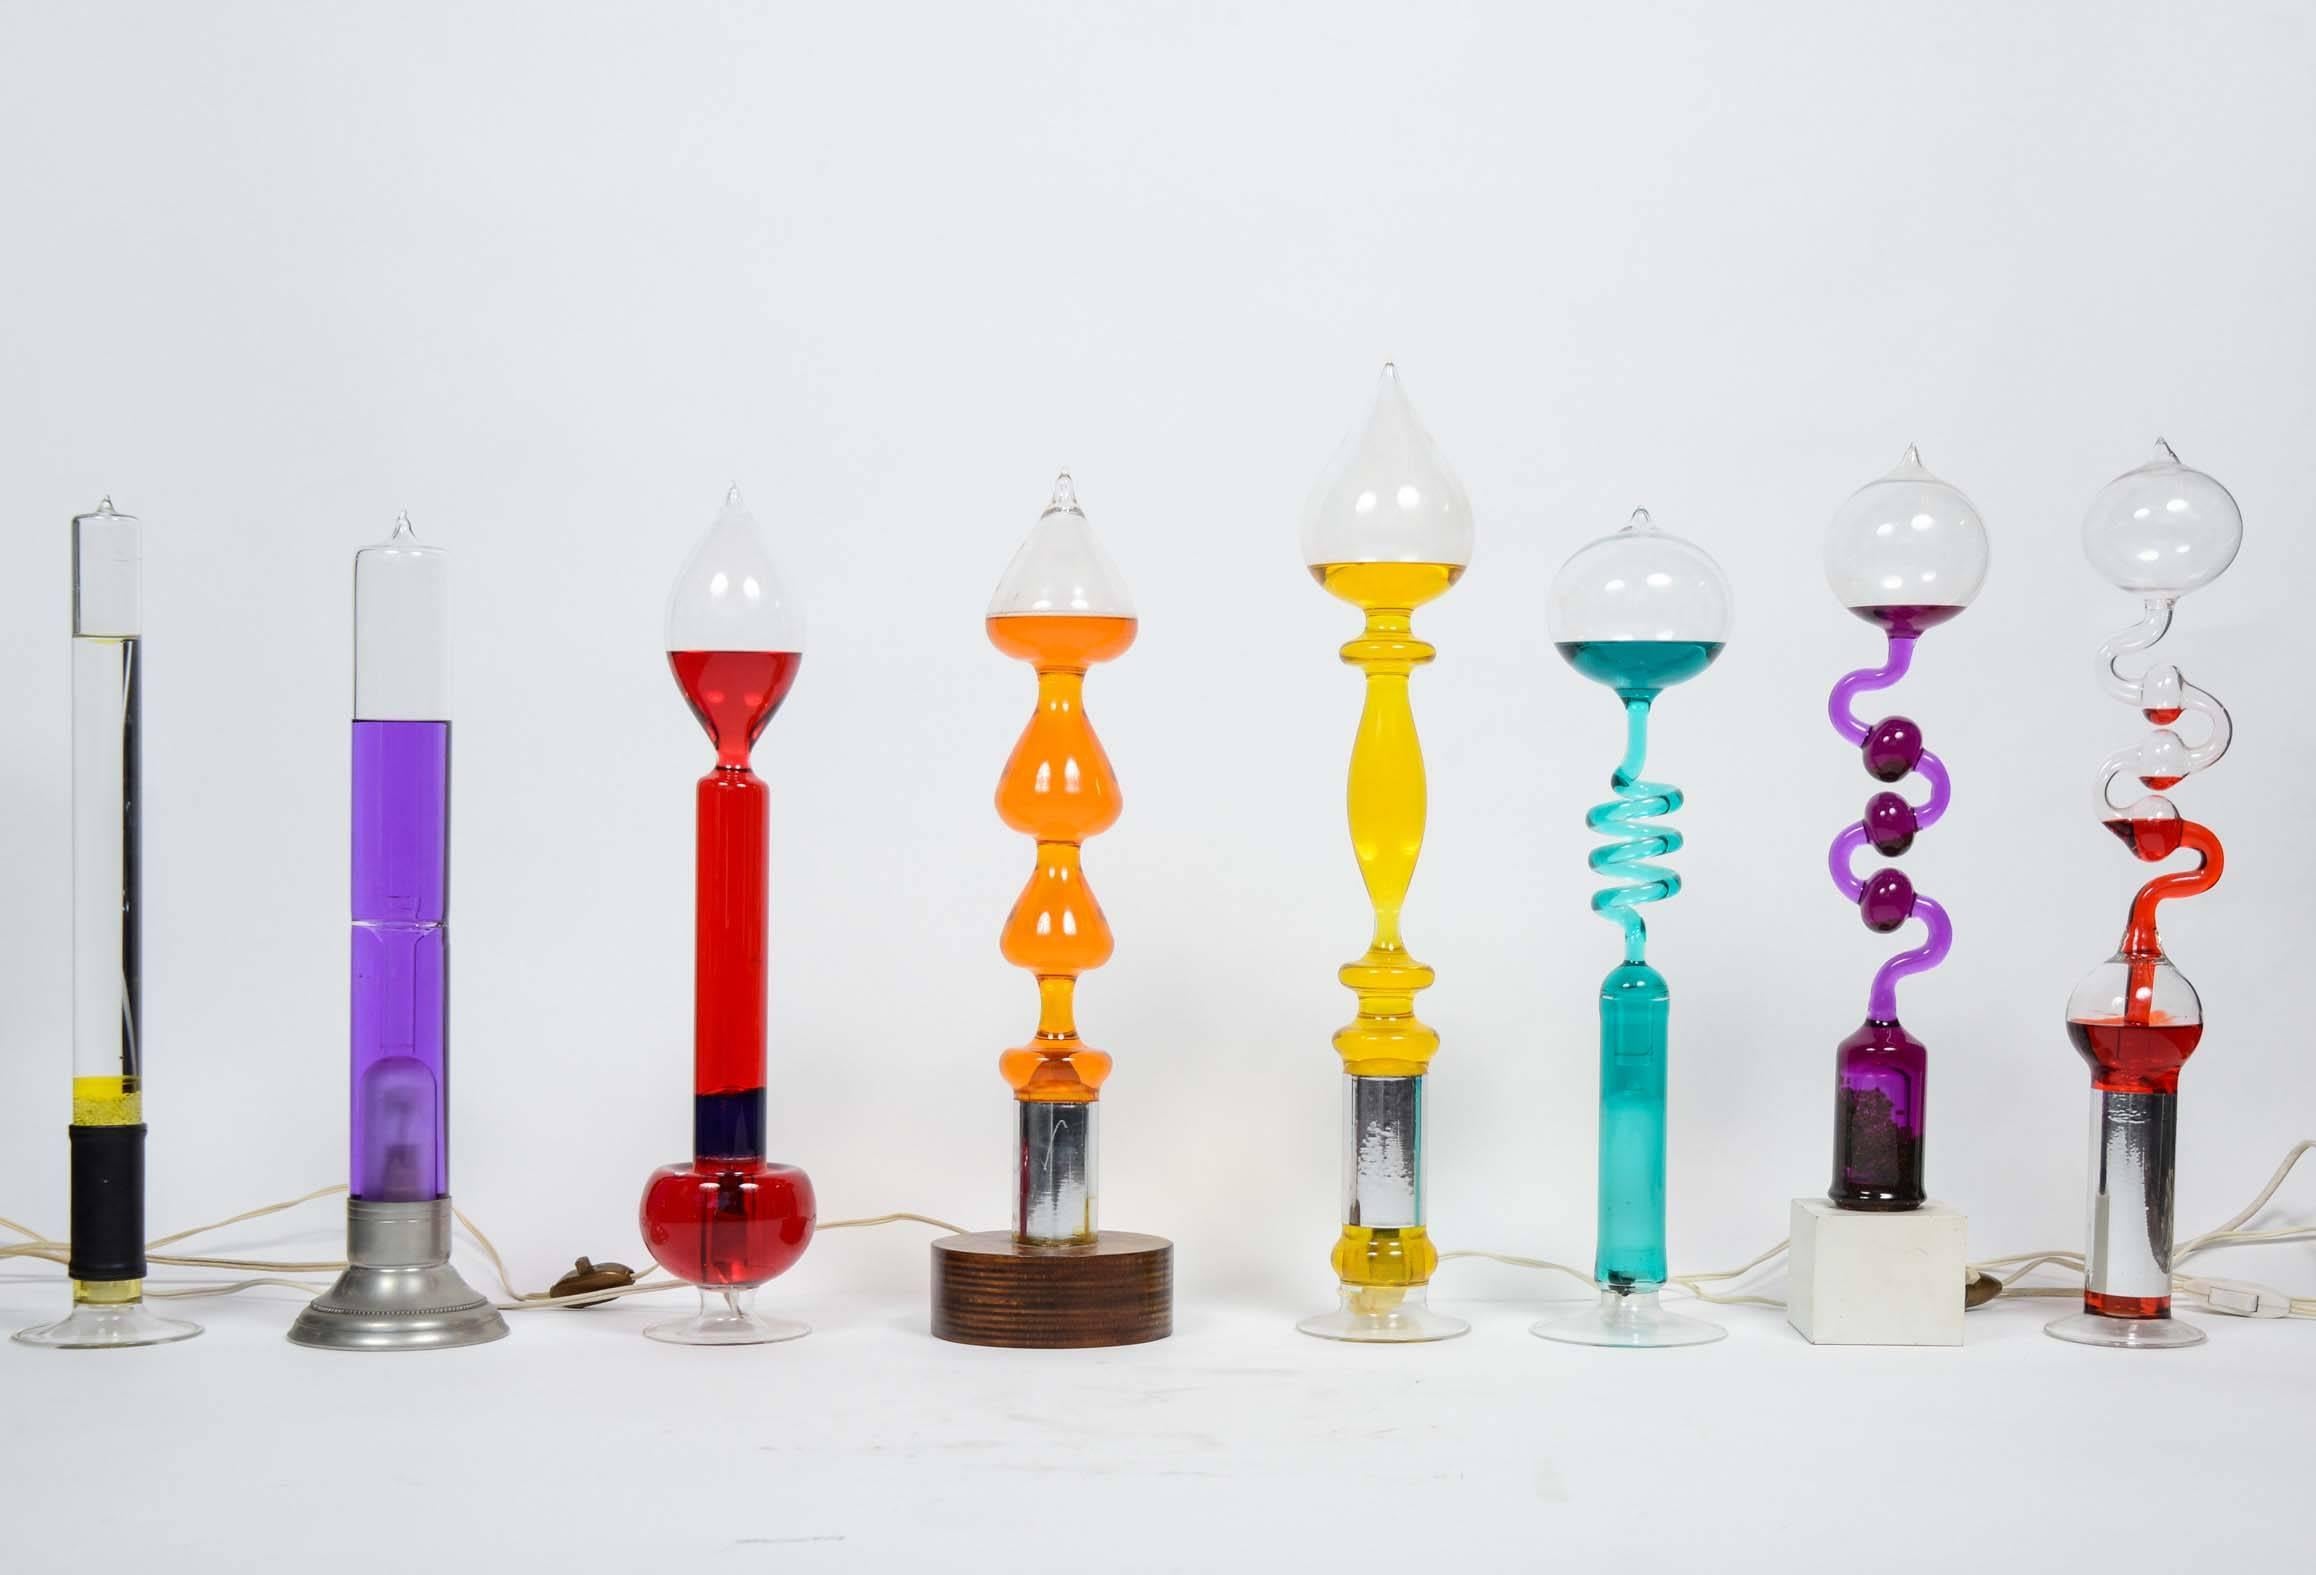 Unique collection of 14 glass lamps of different shapes and sizes with a test tube, chemical aspect, with colored liquid inside.

The bulb inside the lamp is heating the liquid in the lamps which will start to bubble and circulate inside the